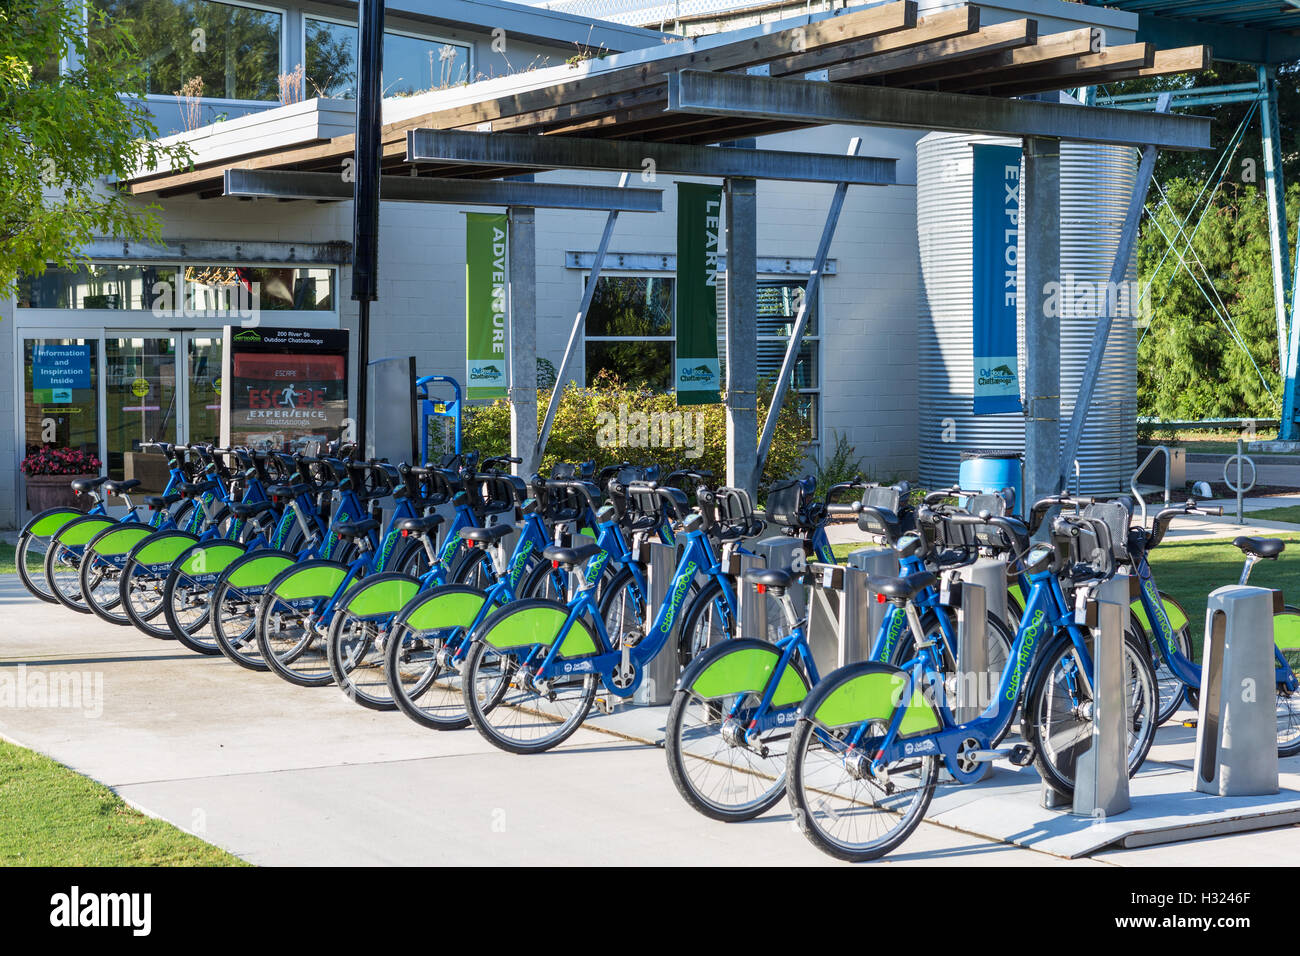 A Bike Chattanooga Bicycle Transit System docking station at Outdoor Chattanooga in Coolidge Park in Chattanooga, Tennessee. Stock Photo